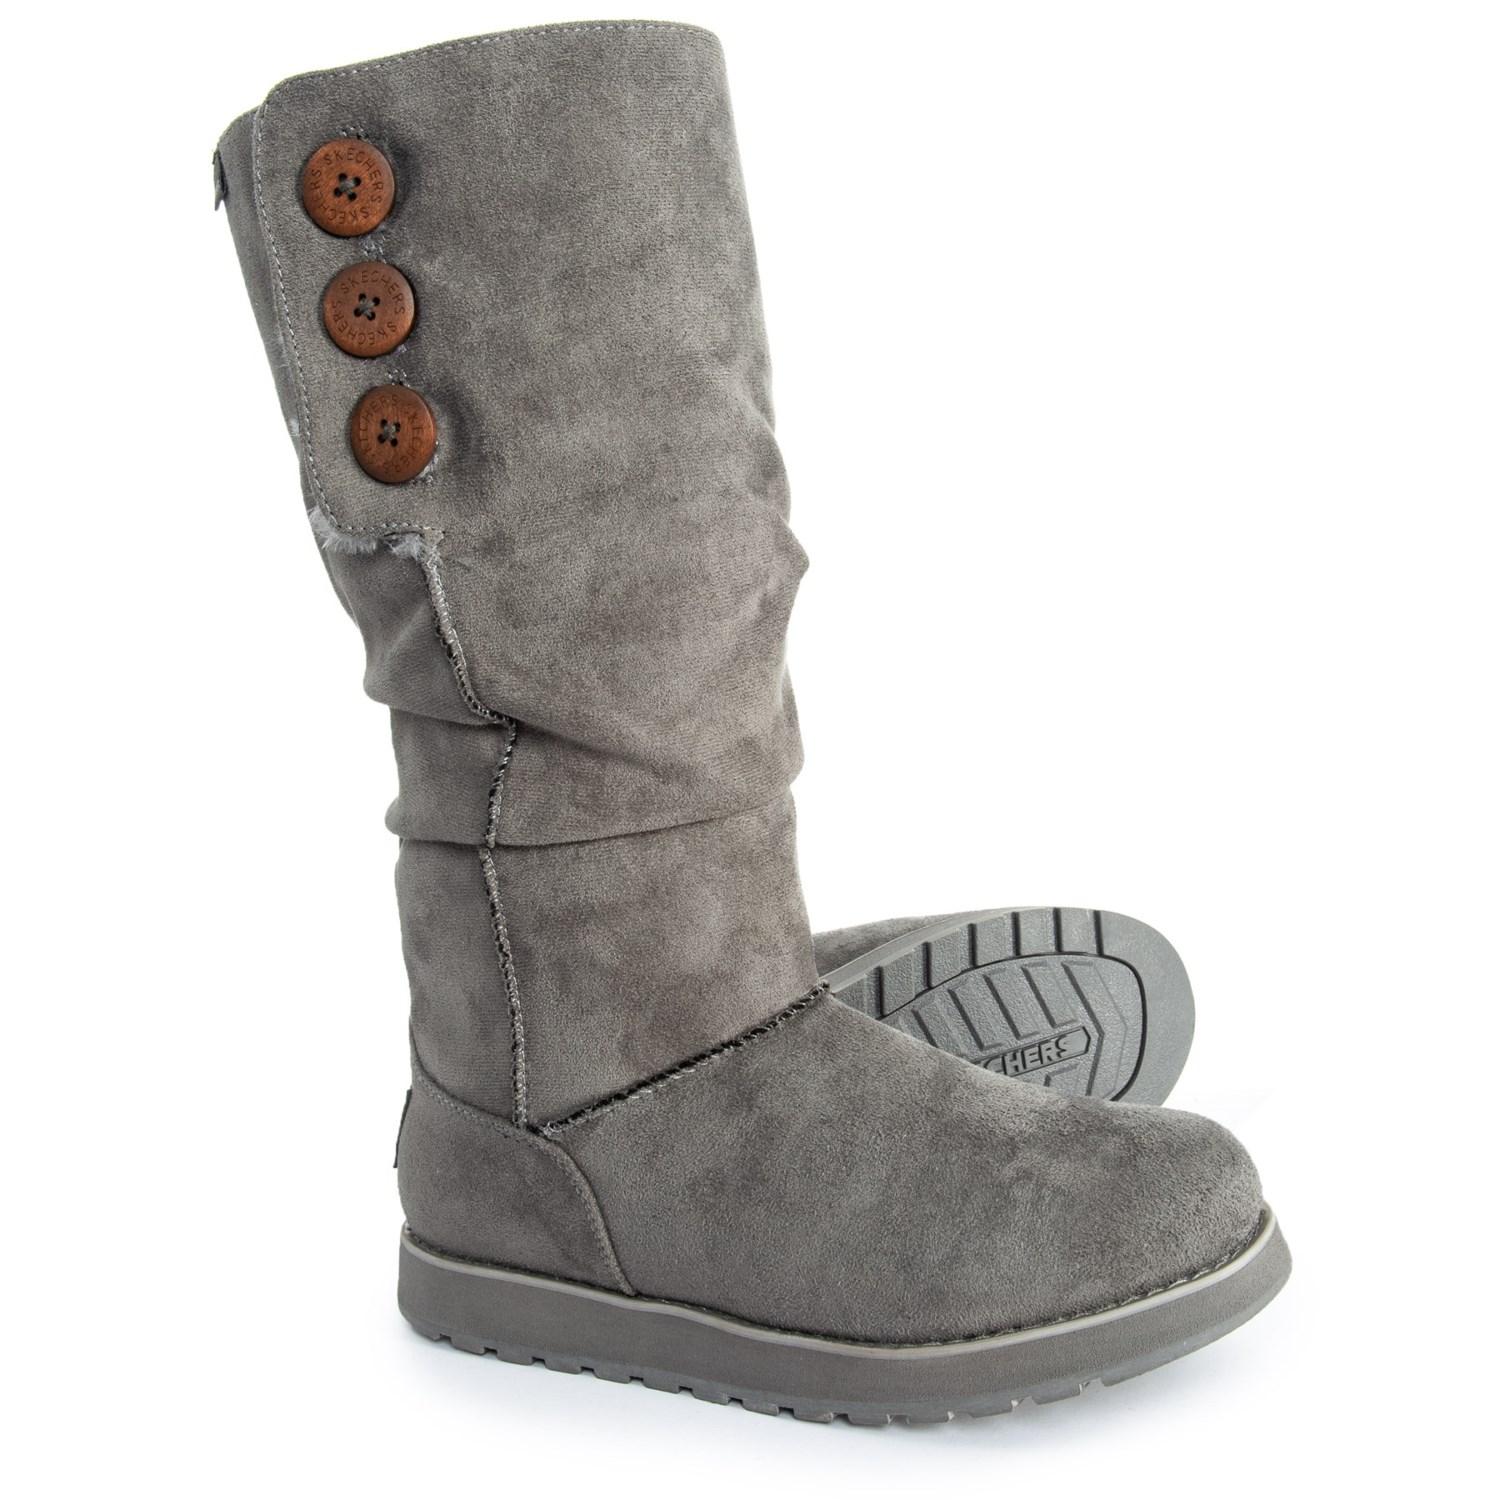 Skechers Tall 3-button Shearling Boots 